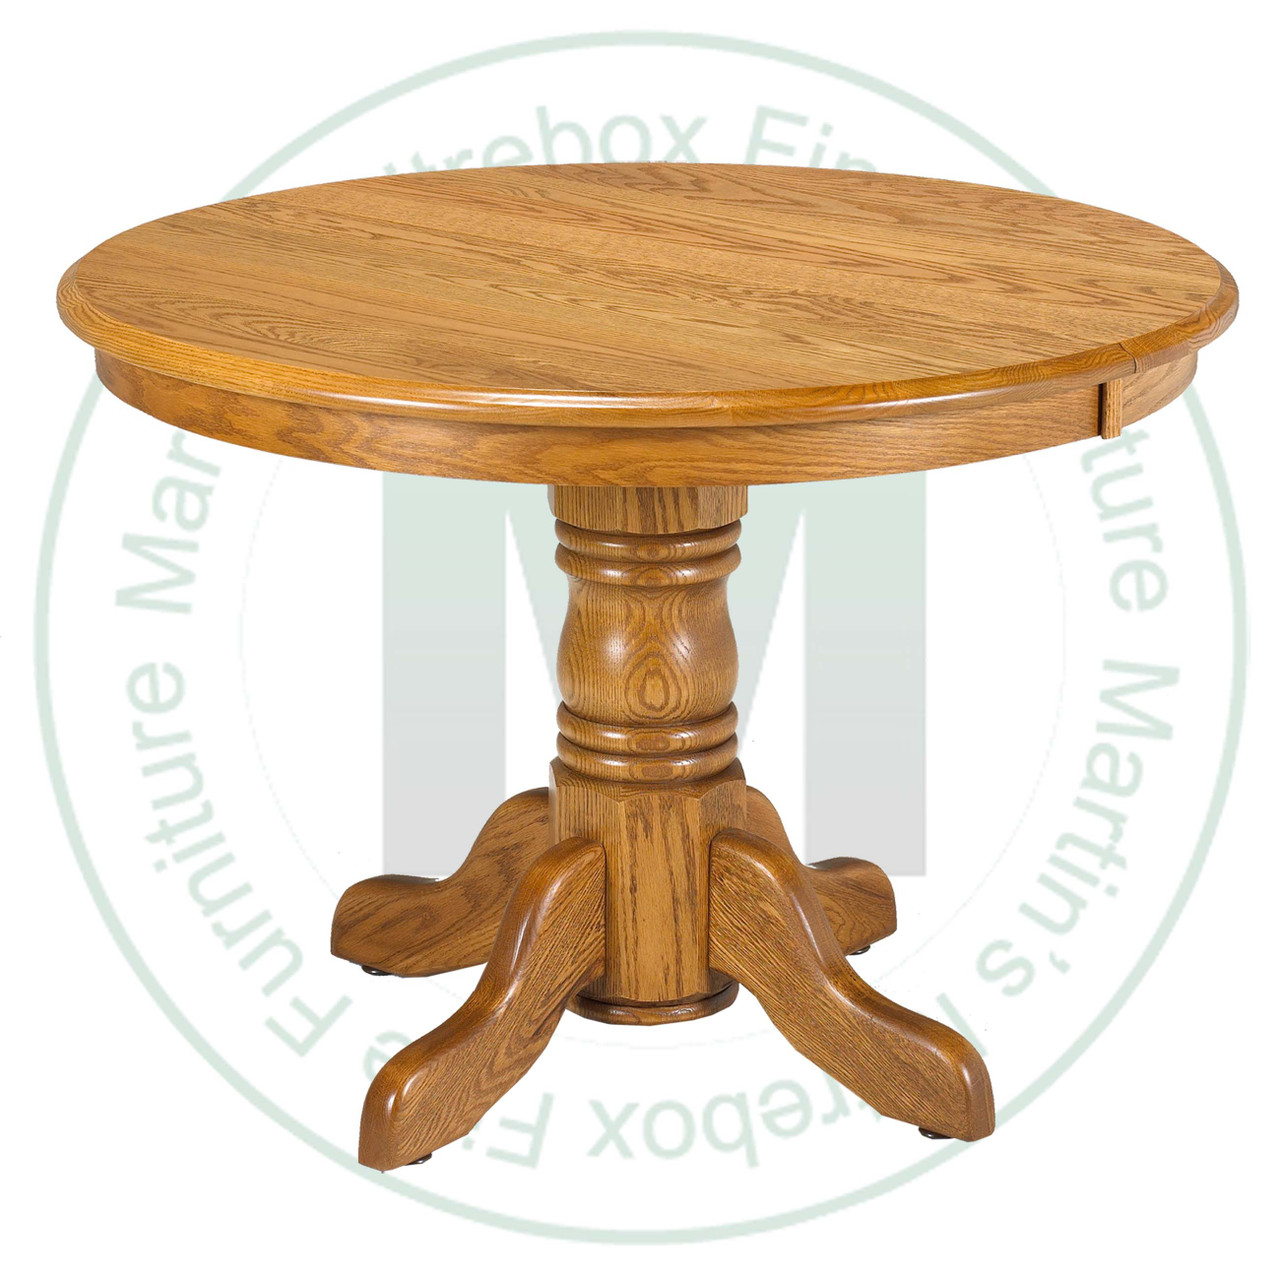 Oak Lancaster Collection Single Pedestal Table 48''D x 48''W x 30''H Round Solid Table. Table Has 1'' Thick Top